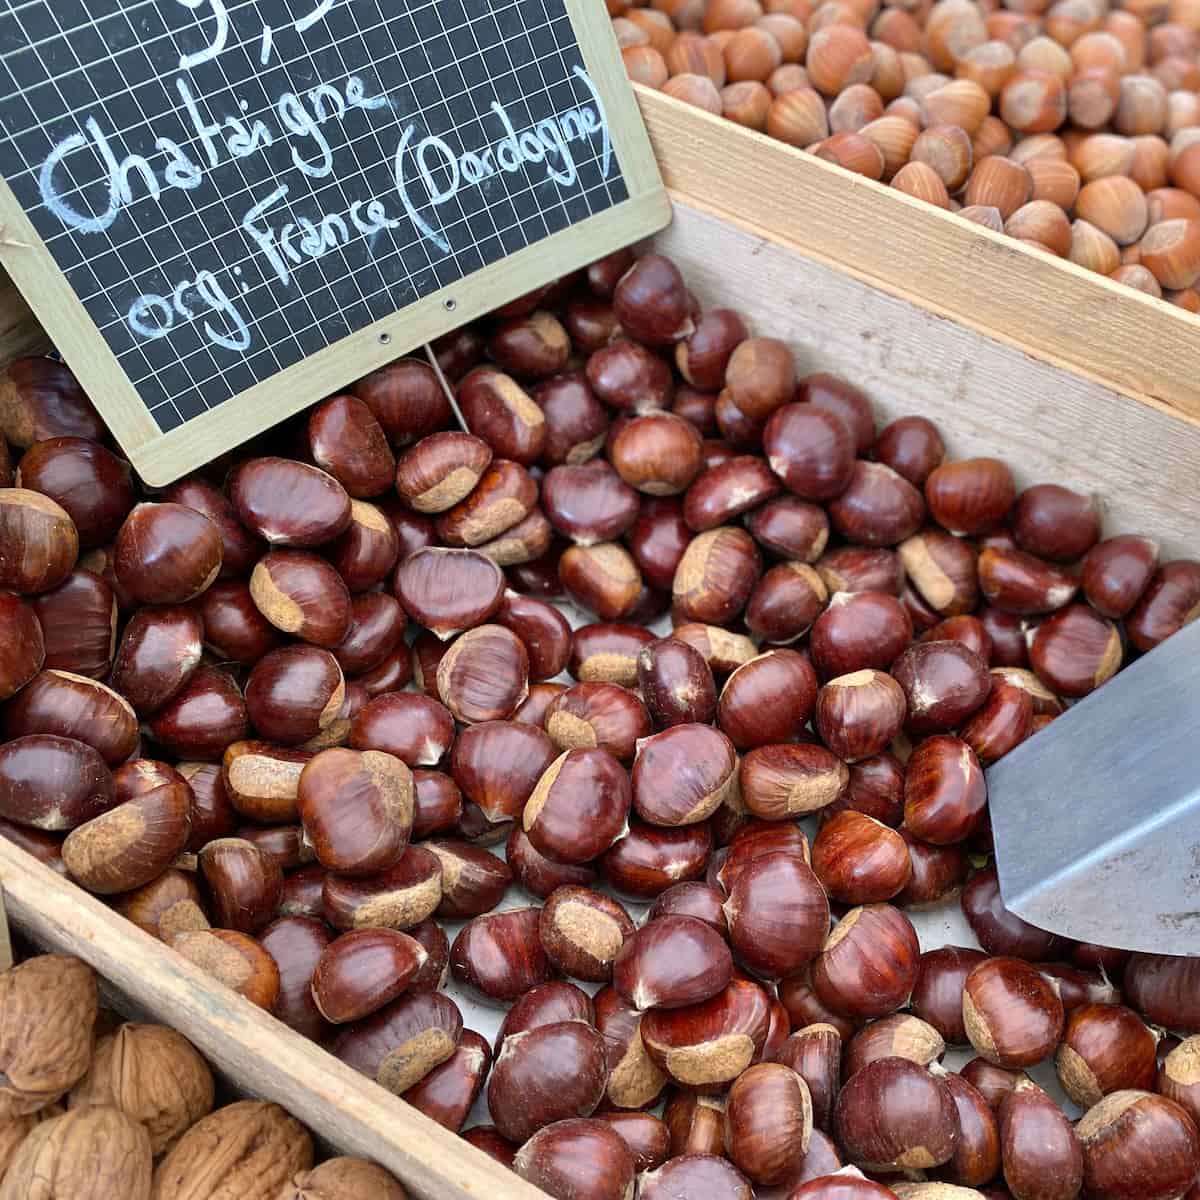 wooden crate of chestnuts in their shells at the French market